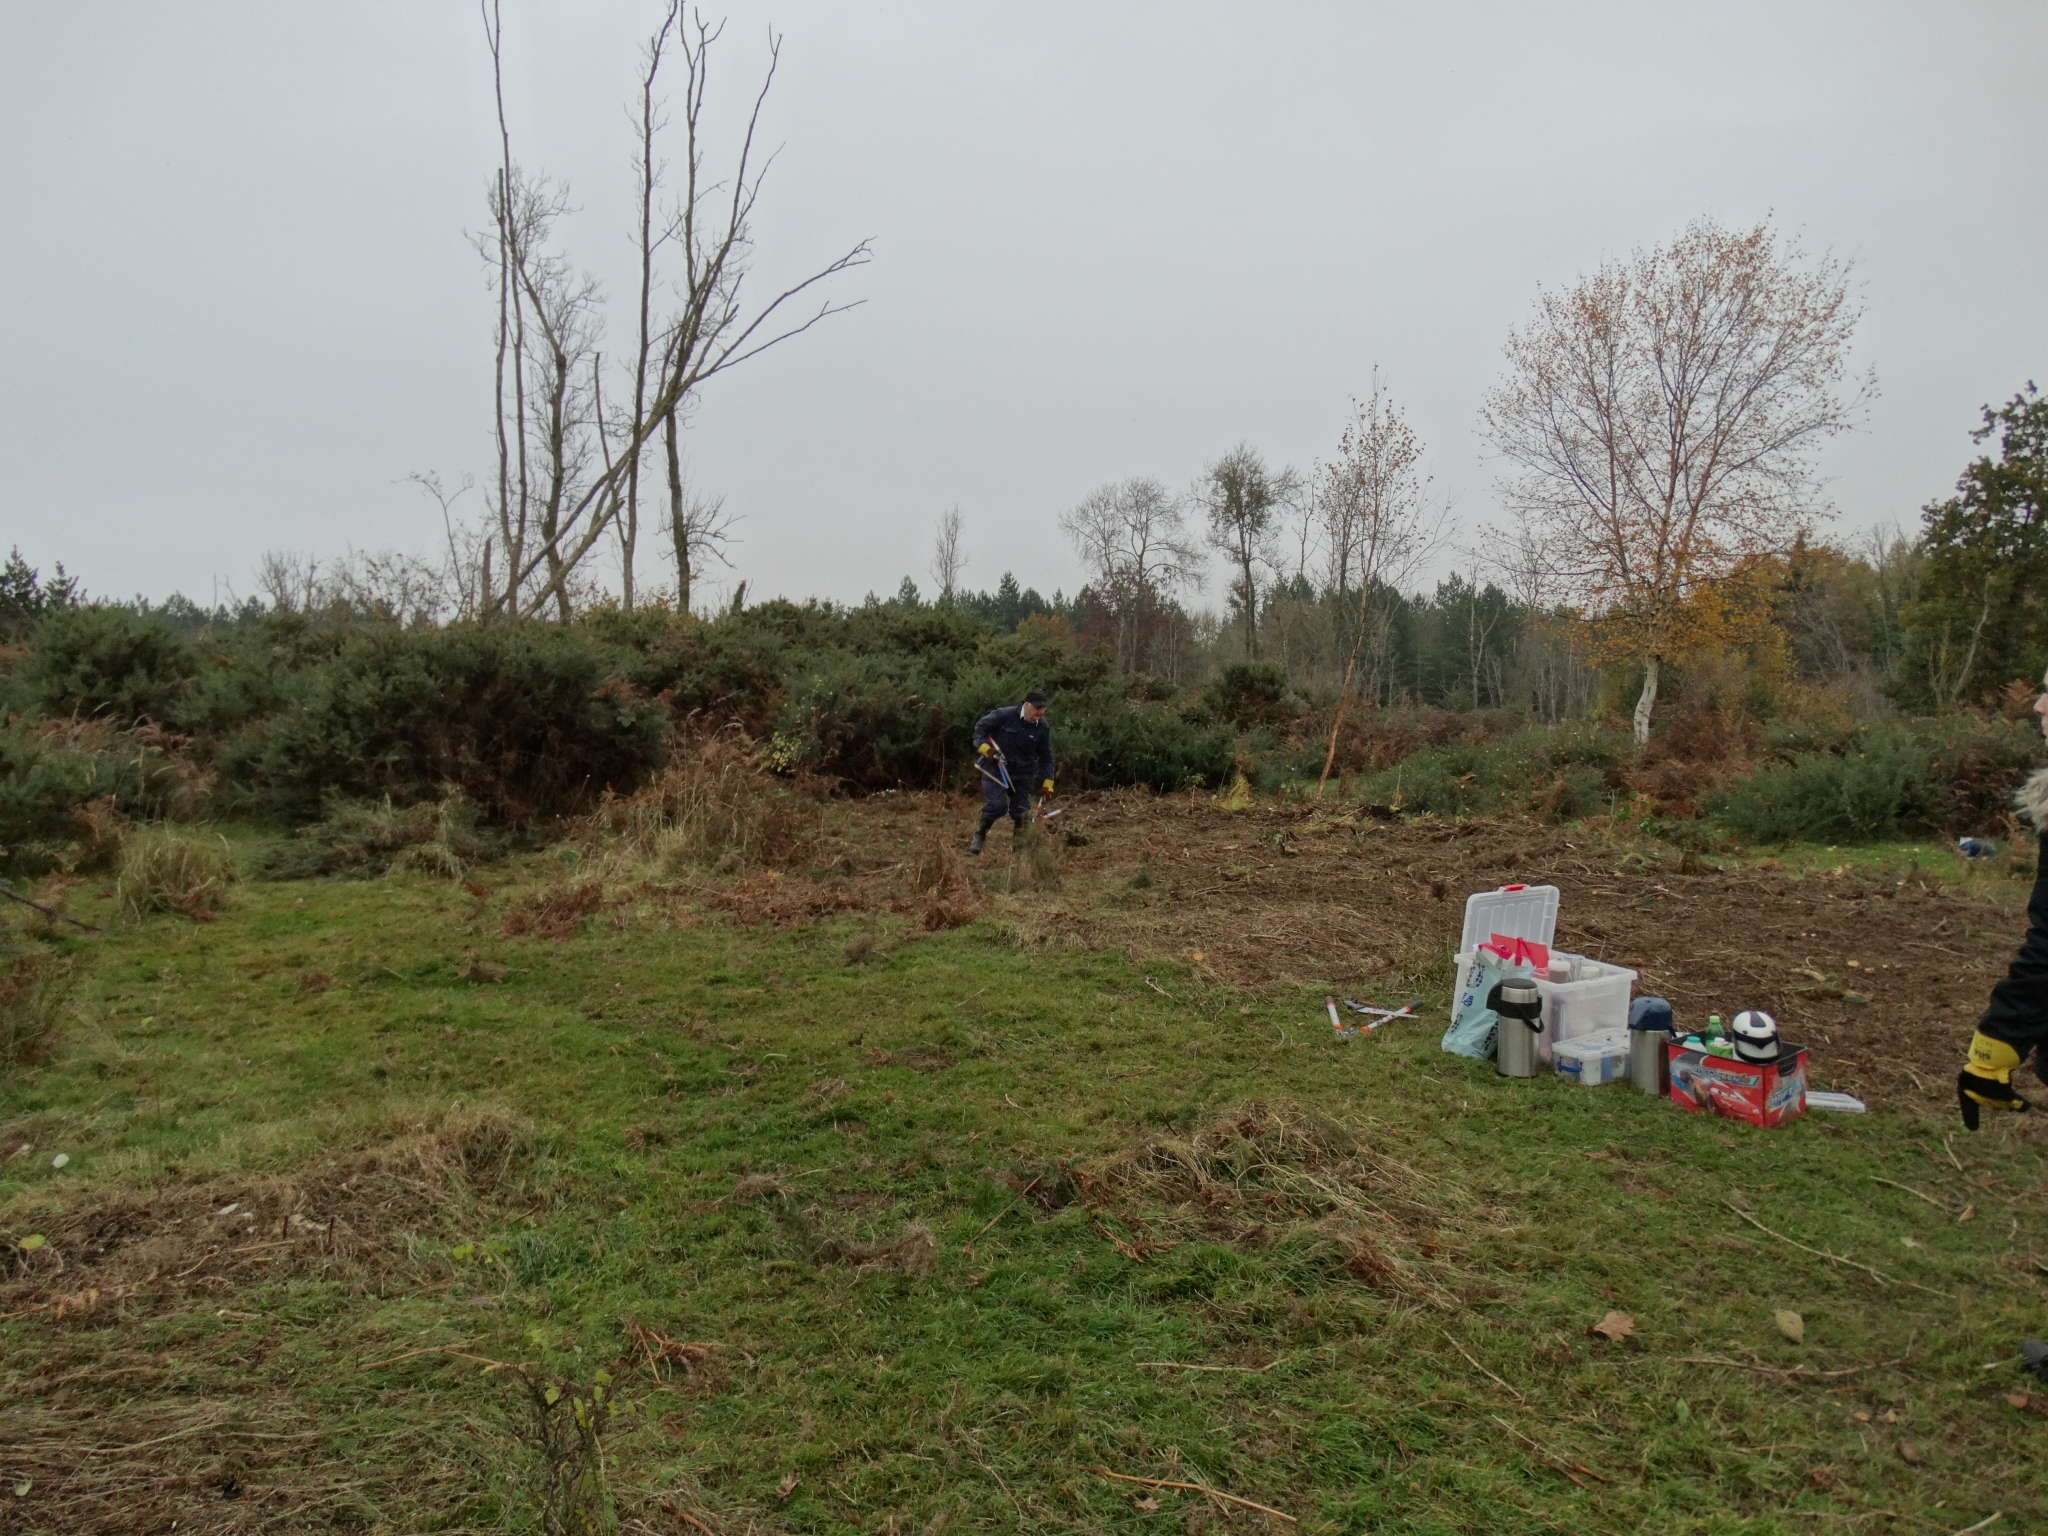 A photo from the FoTF Conservation Event - November 2019 - Gorse Clearance at Hockham Hills & Holes : A volunteers collects the tools